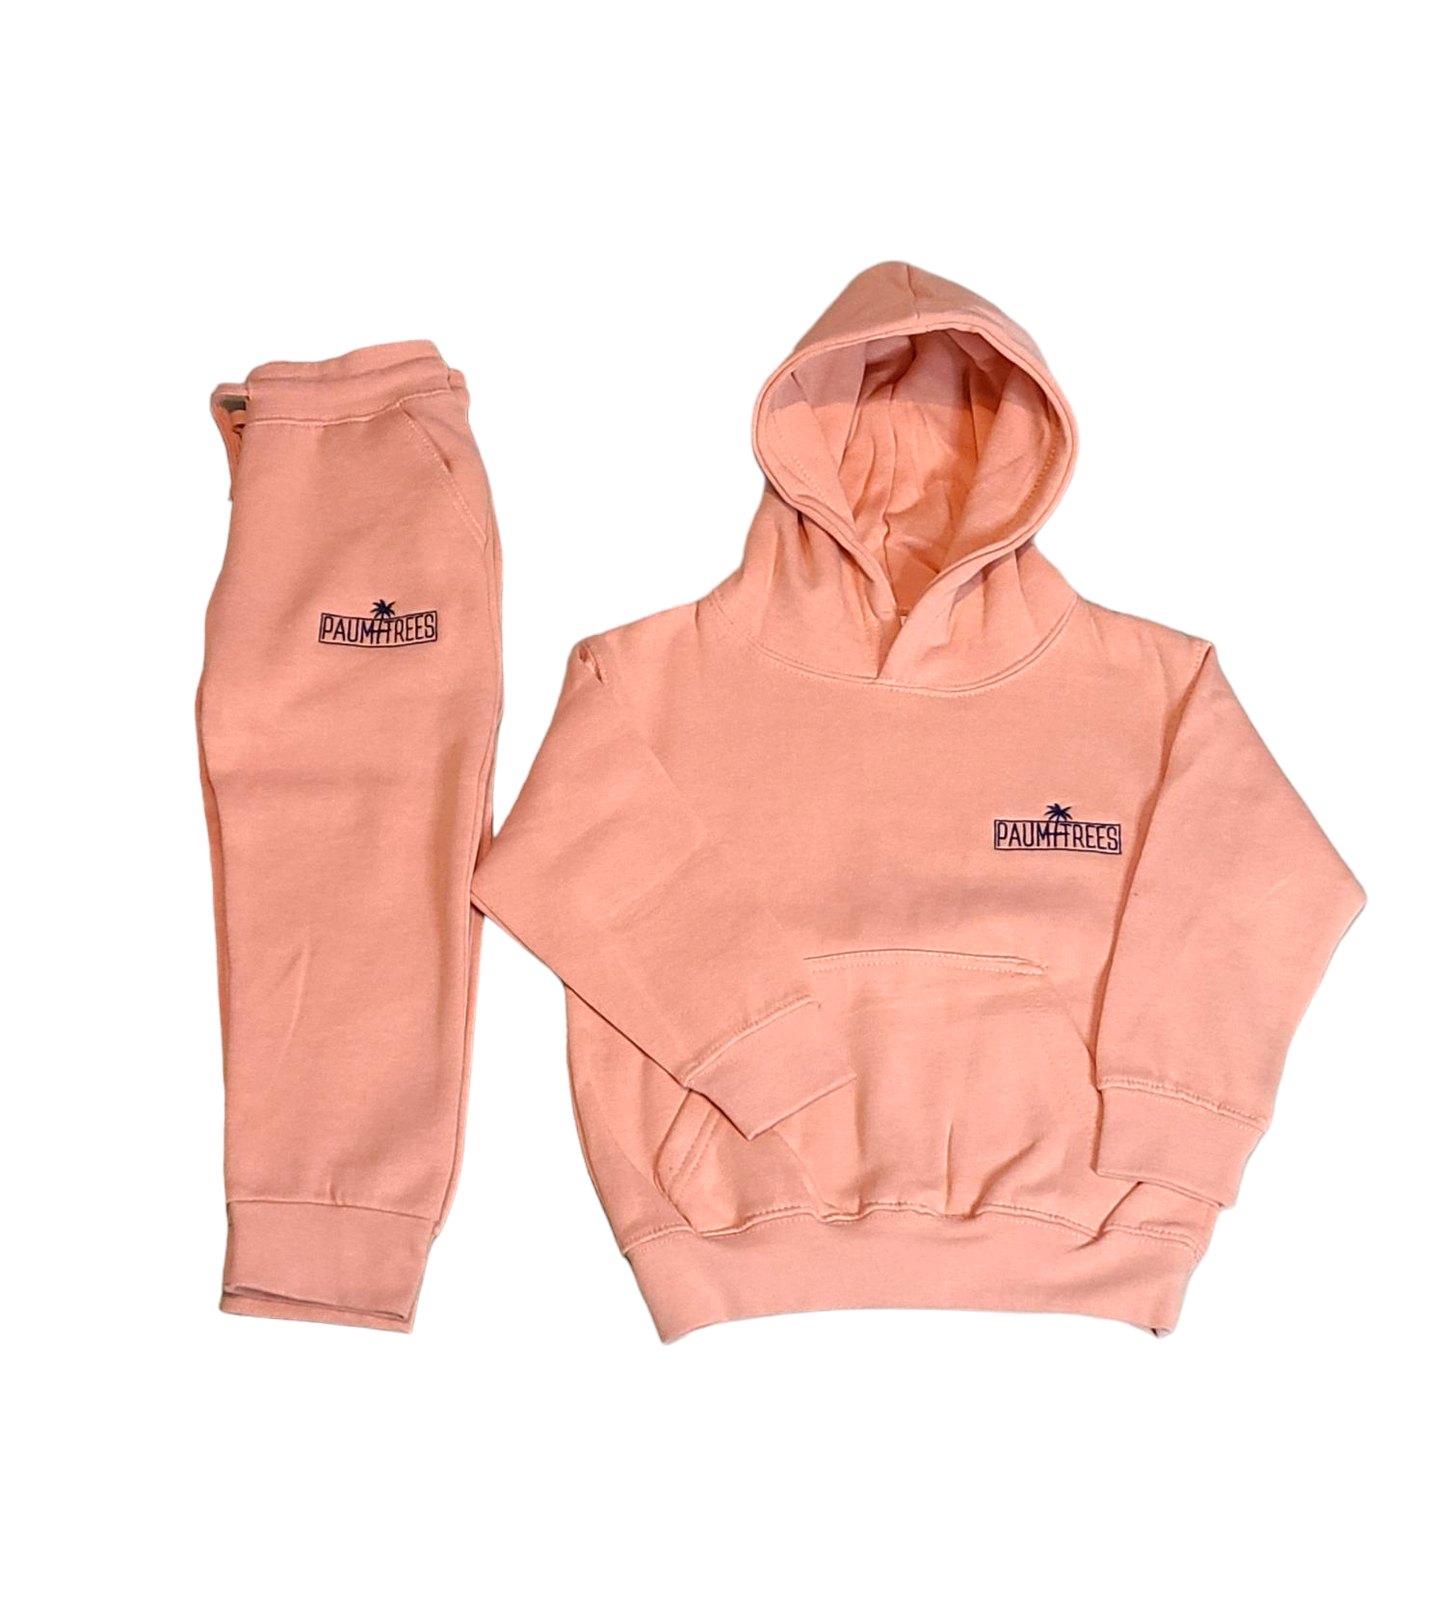 Children's Paumtrees Onyx or Peach Embroidery Hoodie set